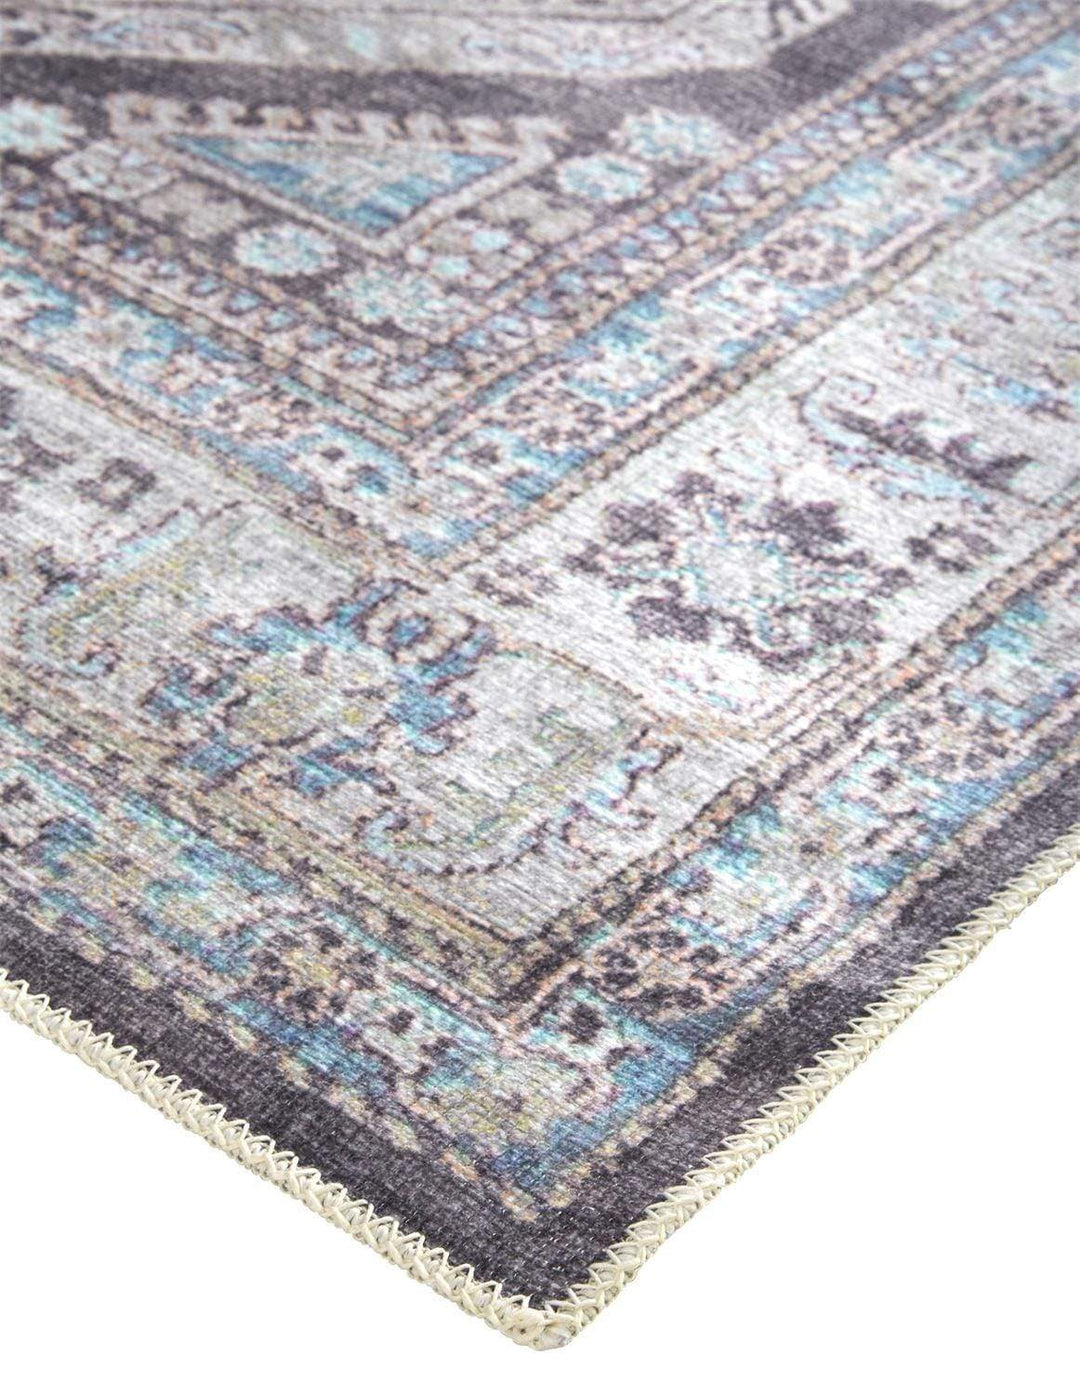 Feizy Feizy Percy Vintage Geometric Medallion Rug - Silver Gray & Blue - Available in 5 Sizes